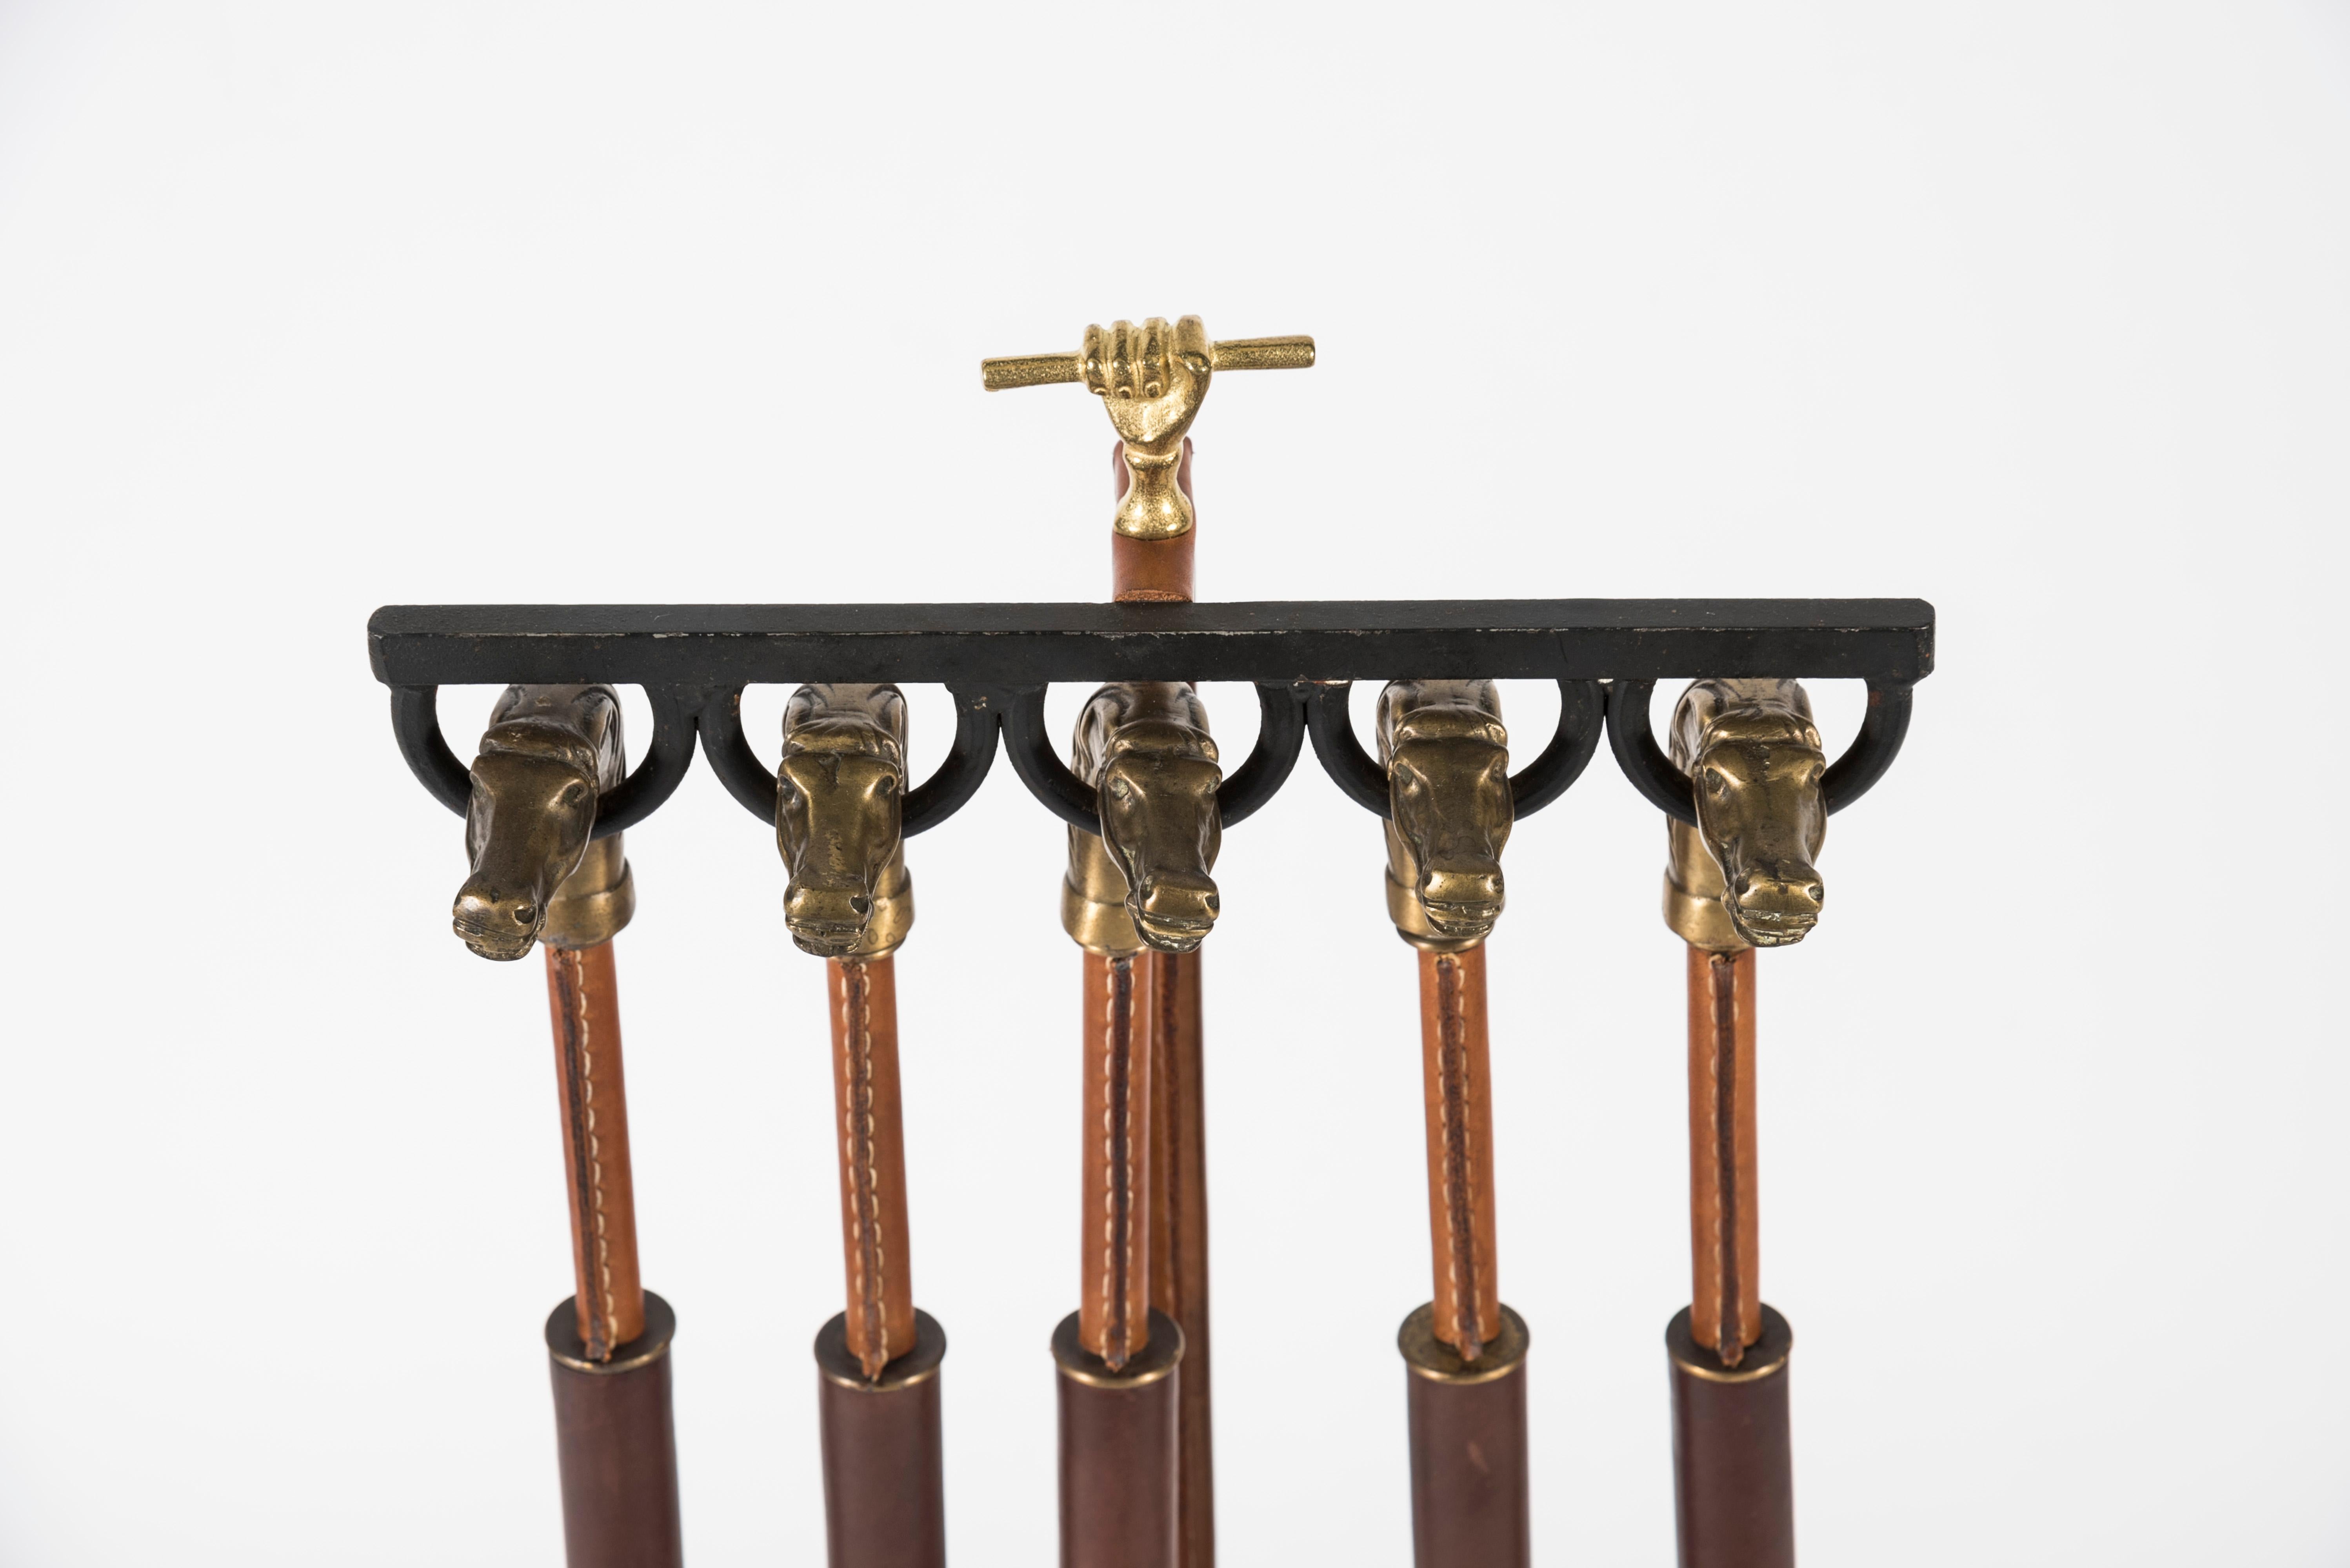 Very nice set of fireplace tools covered with stitched leather.